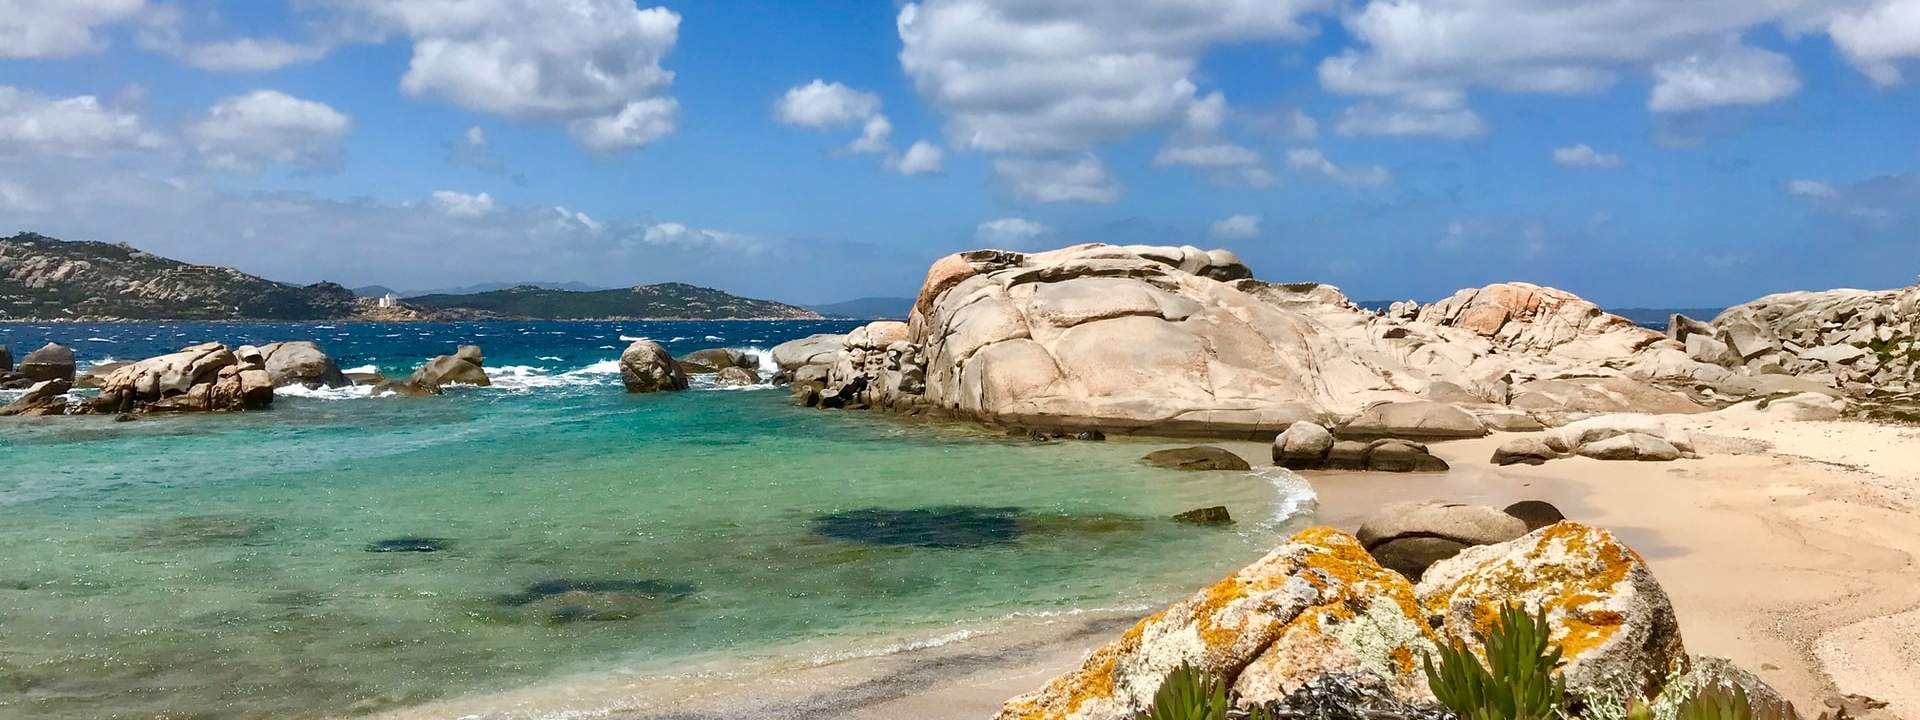 Explore Northern Sardinia & Southern Corsica in 7 days!